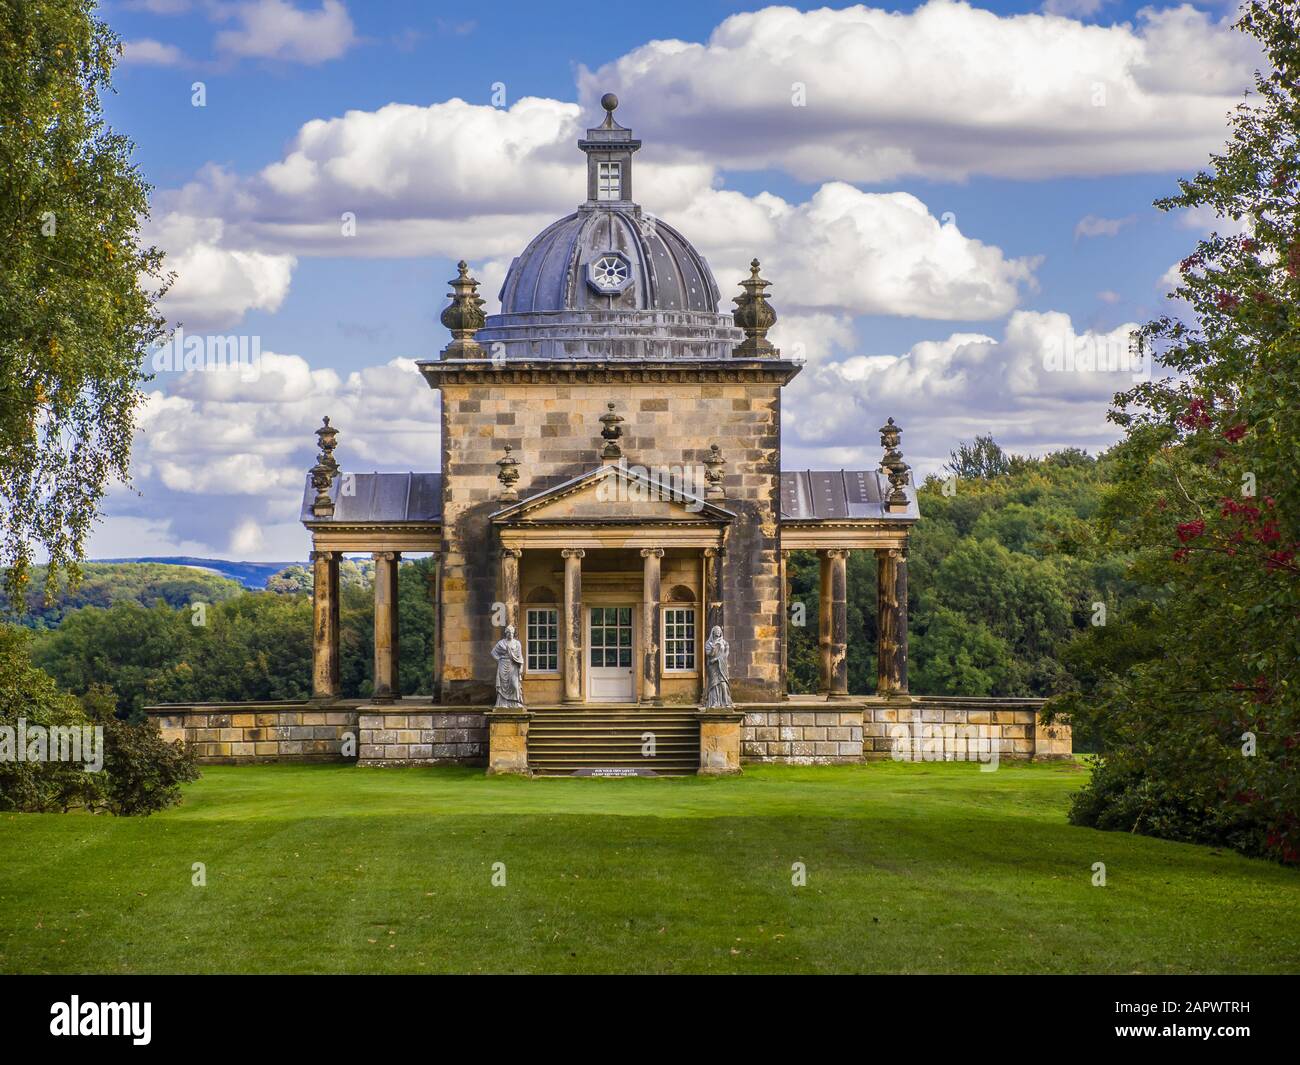 Temple of the Four Winds - Castle Howard Stock Photo